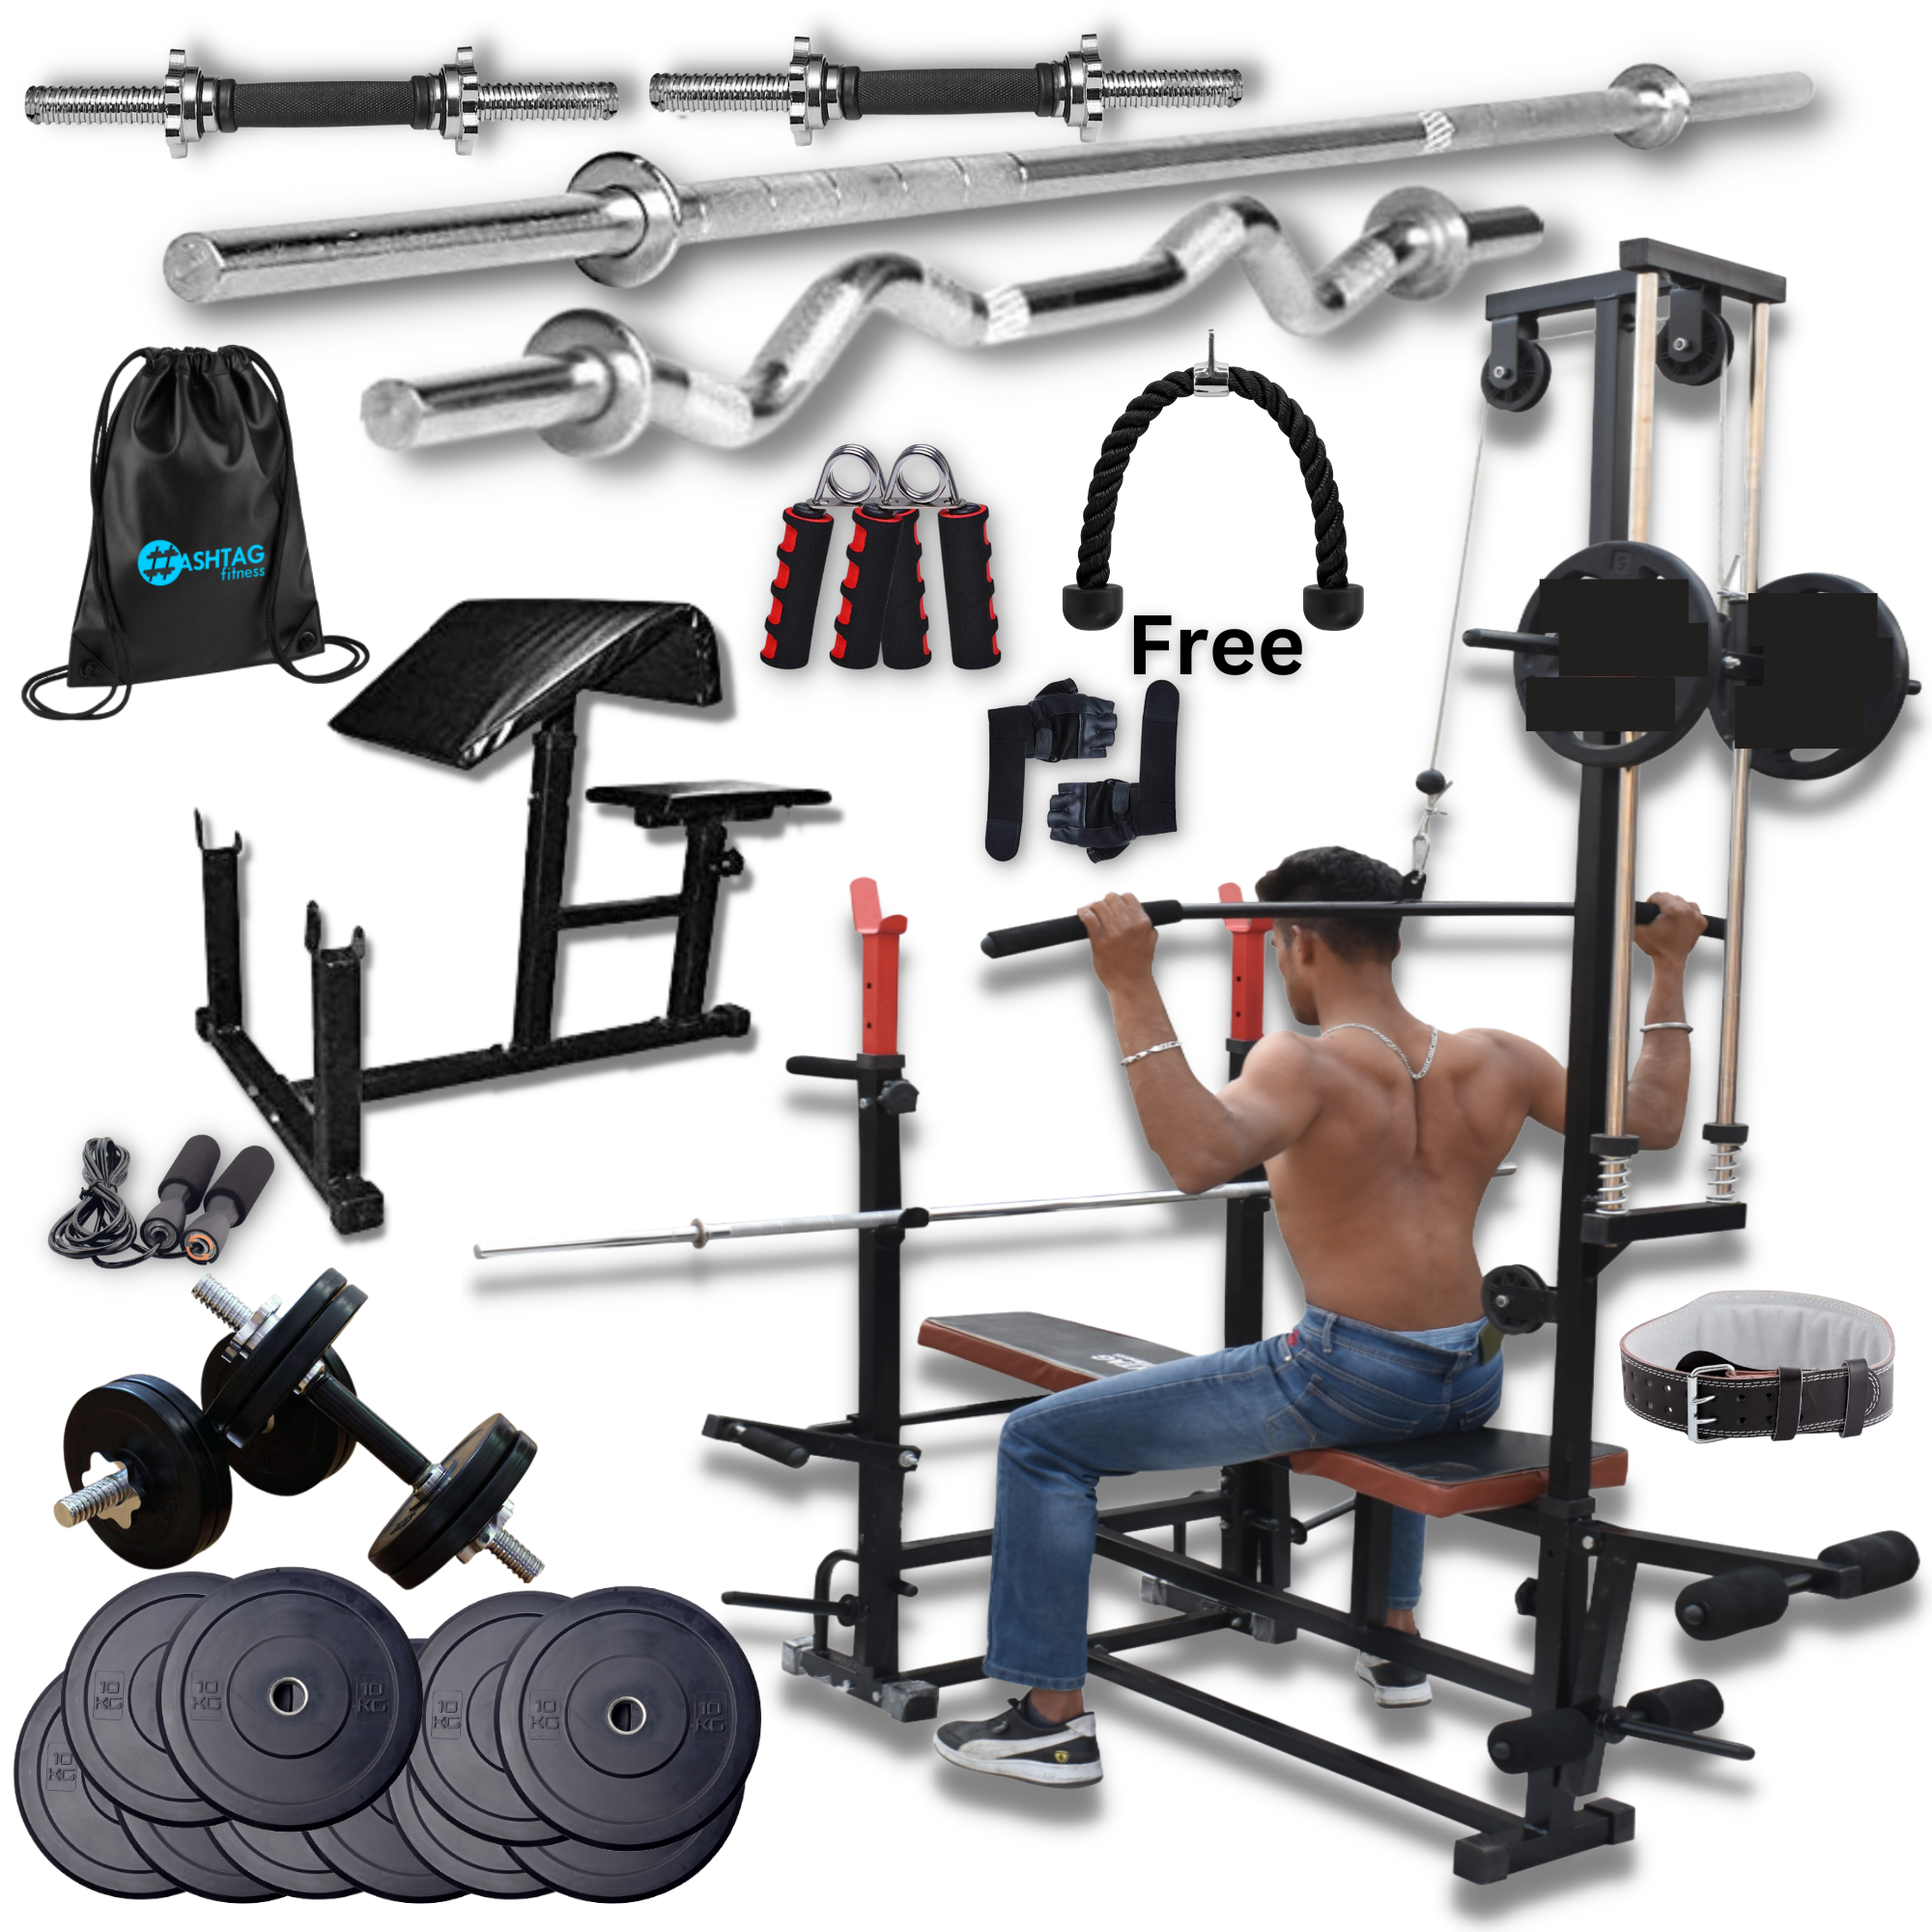 HASHTAG FITNESS 10kg to 60kg Gym Equipment Set for Home Workout Dumbbells  Set for Home Gym for Home with 8in1 Gym Bench for Home Workout